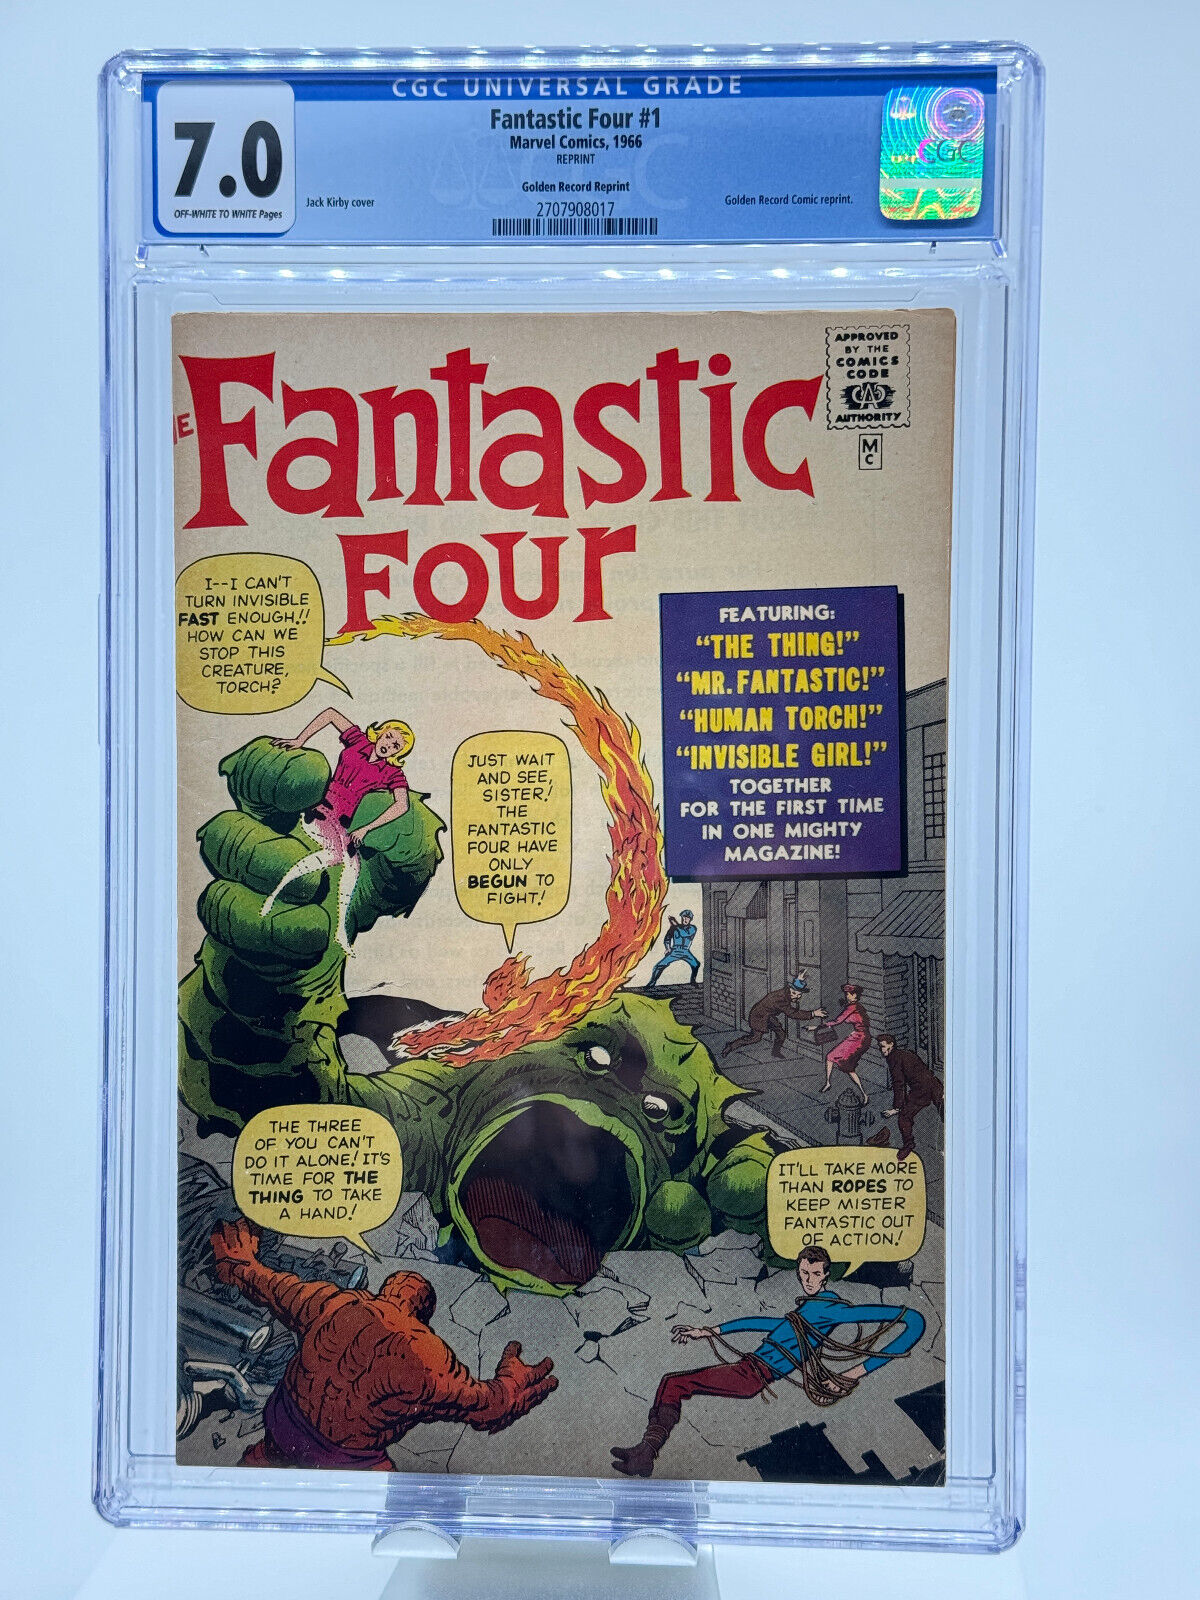 Fantastic Four #1 CGC 7.0 GOLDEN RECORD REPRINT ( COMIC ONLY NO RECORD INCLUDED)